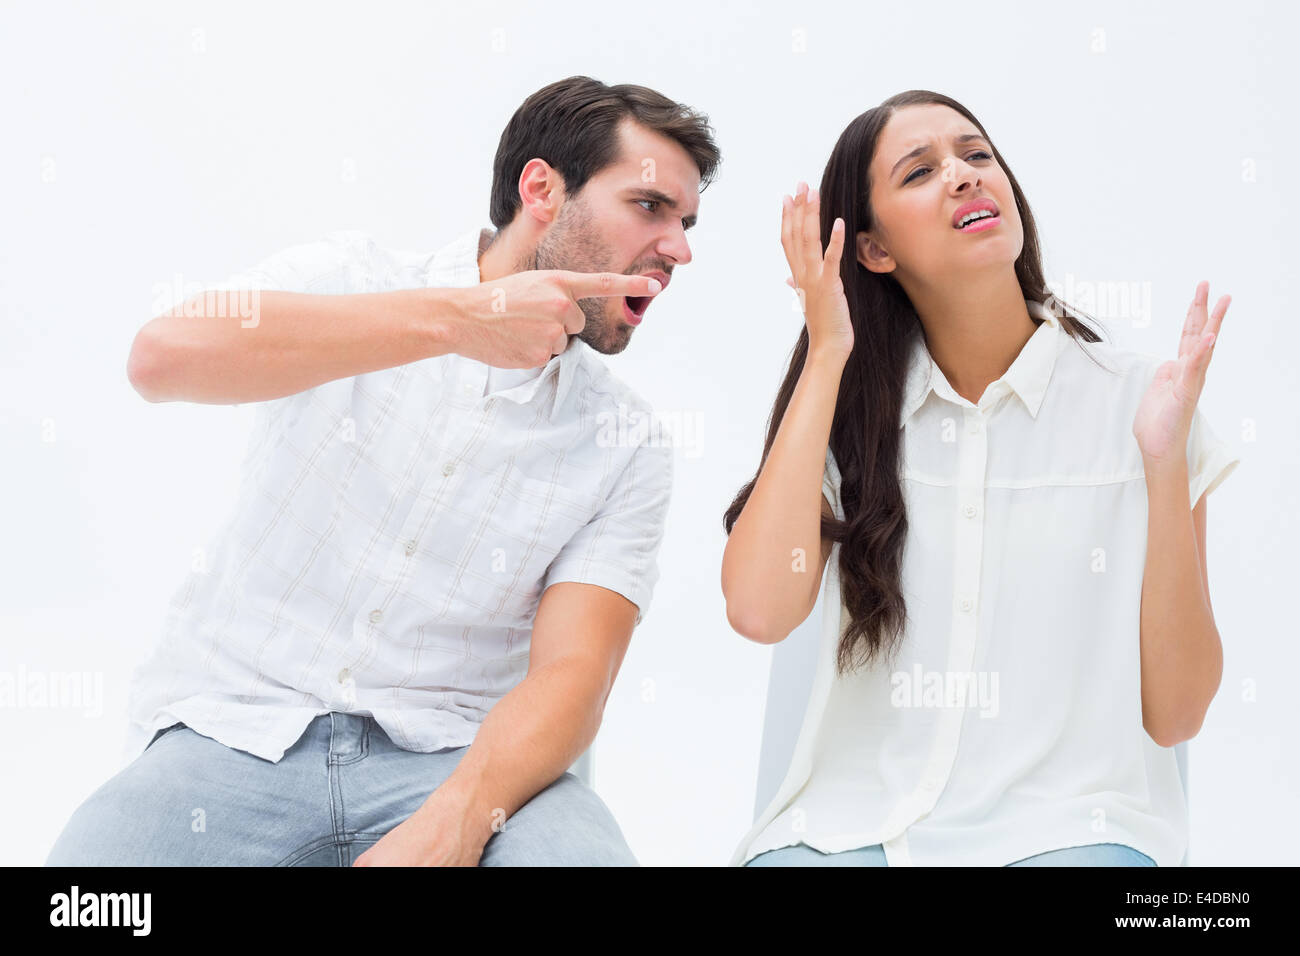 Couple sitting on chairs arguing Stock Photo